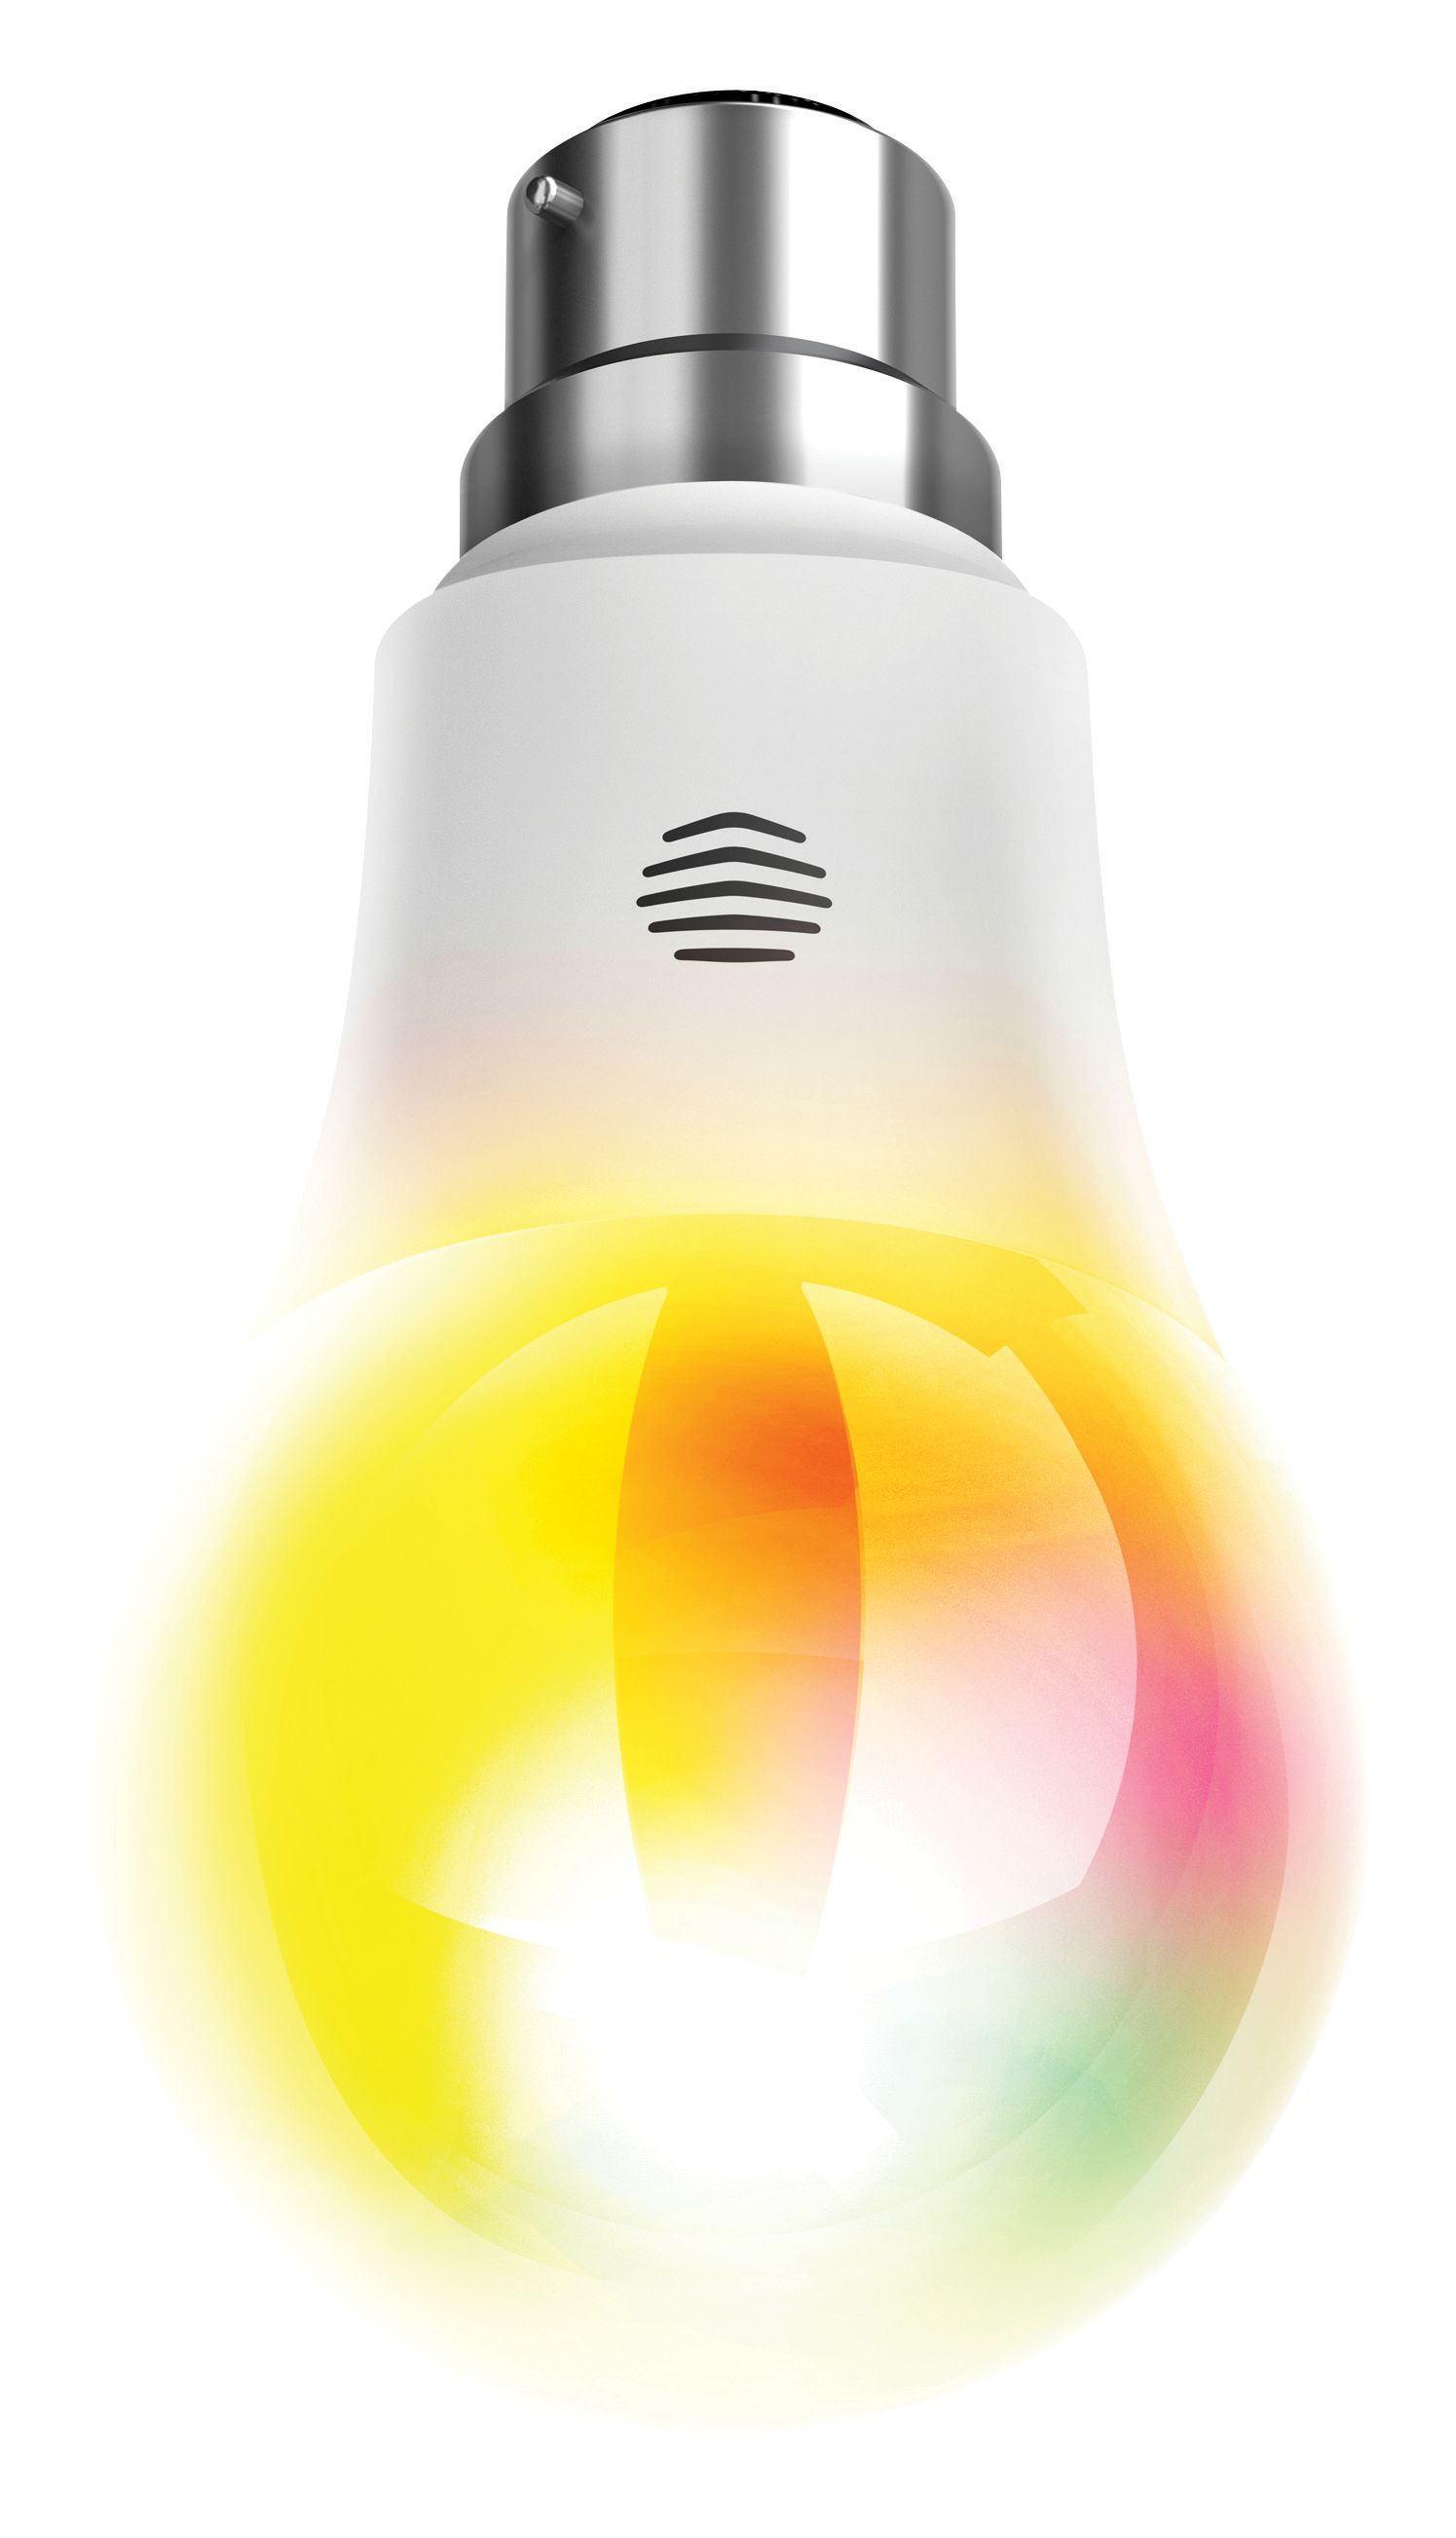 Image of Hive Active LED B22 Colour Changing Light Bulb - 9.5W